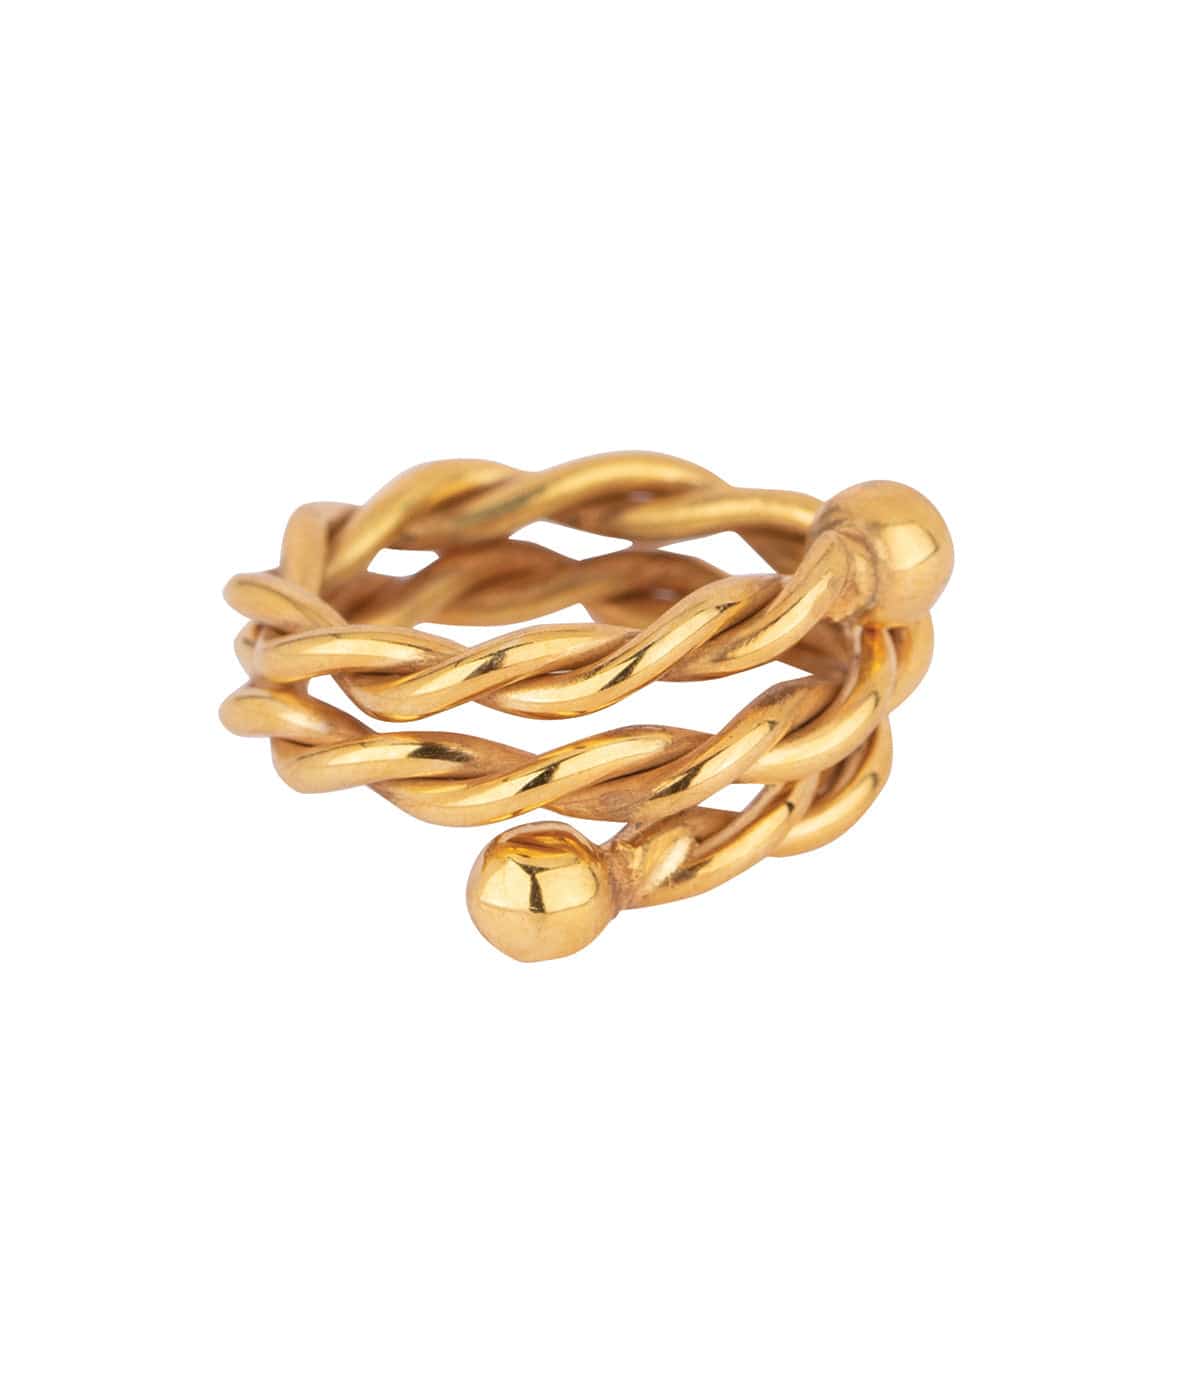 Sezen Ring With Rope Twirl Design 18k Gold Plated On Brass - ZEWAR Jewelry